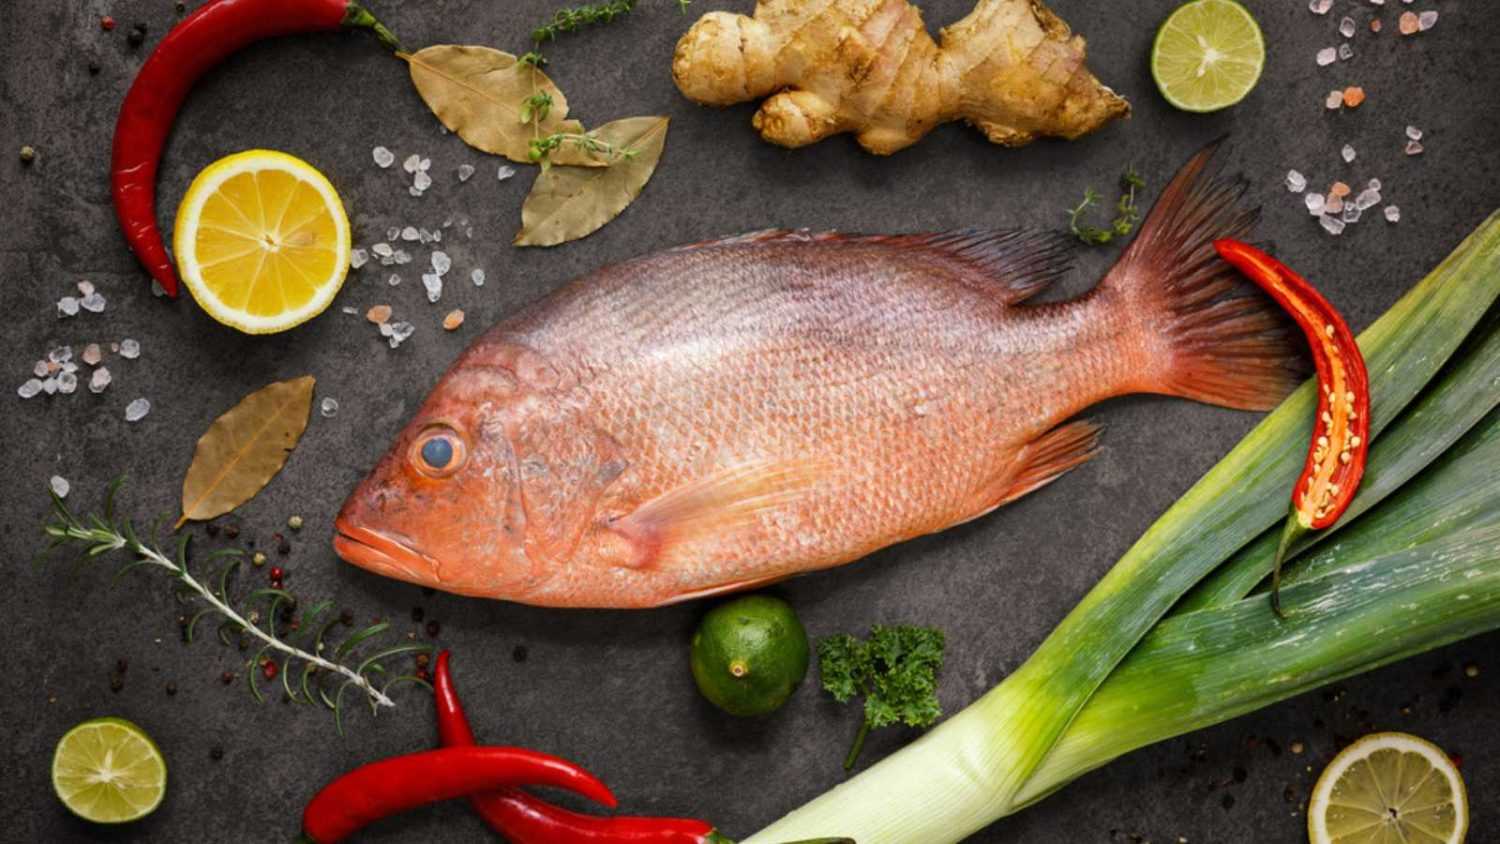 Fresh ingredients to cook fish, red snapper, leak, lime, lemon, parsley, chili pepper, ginger. Top view